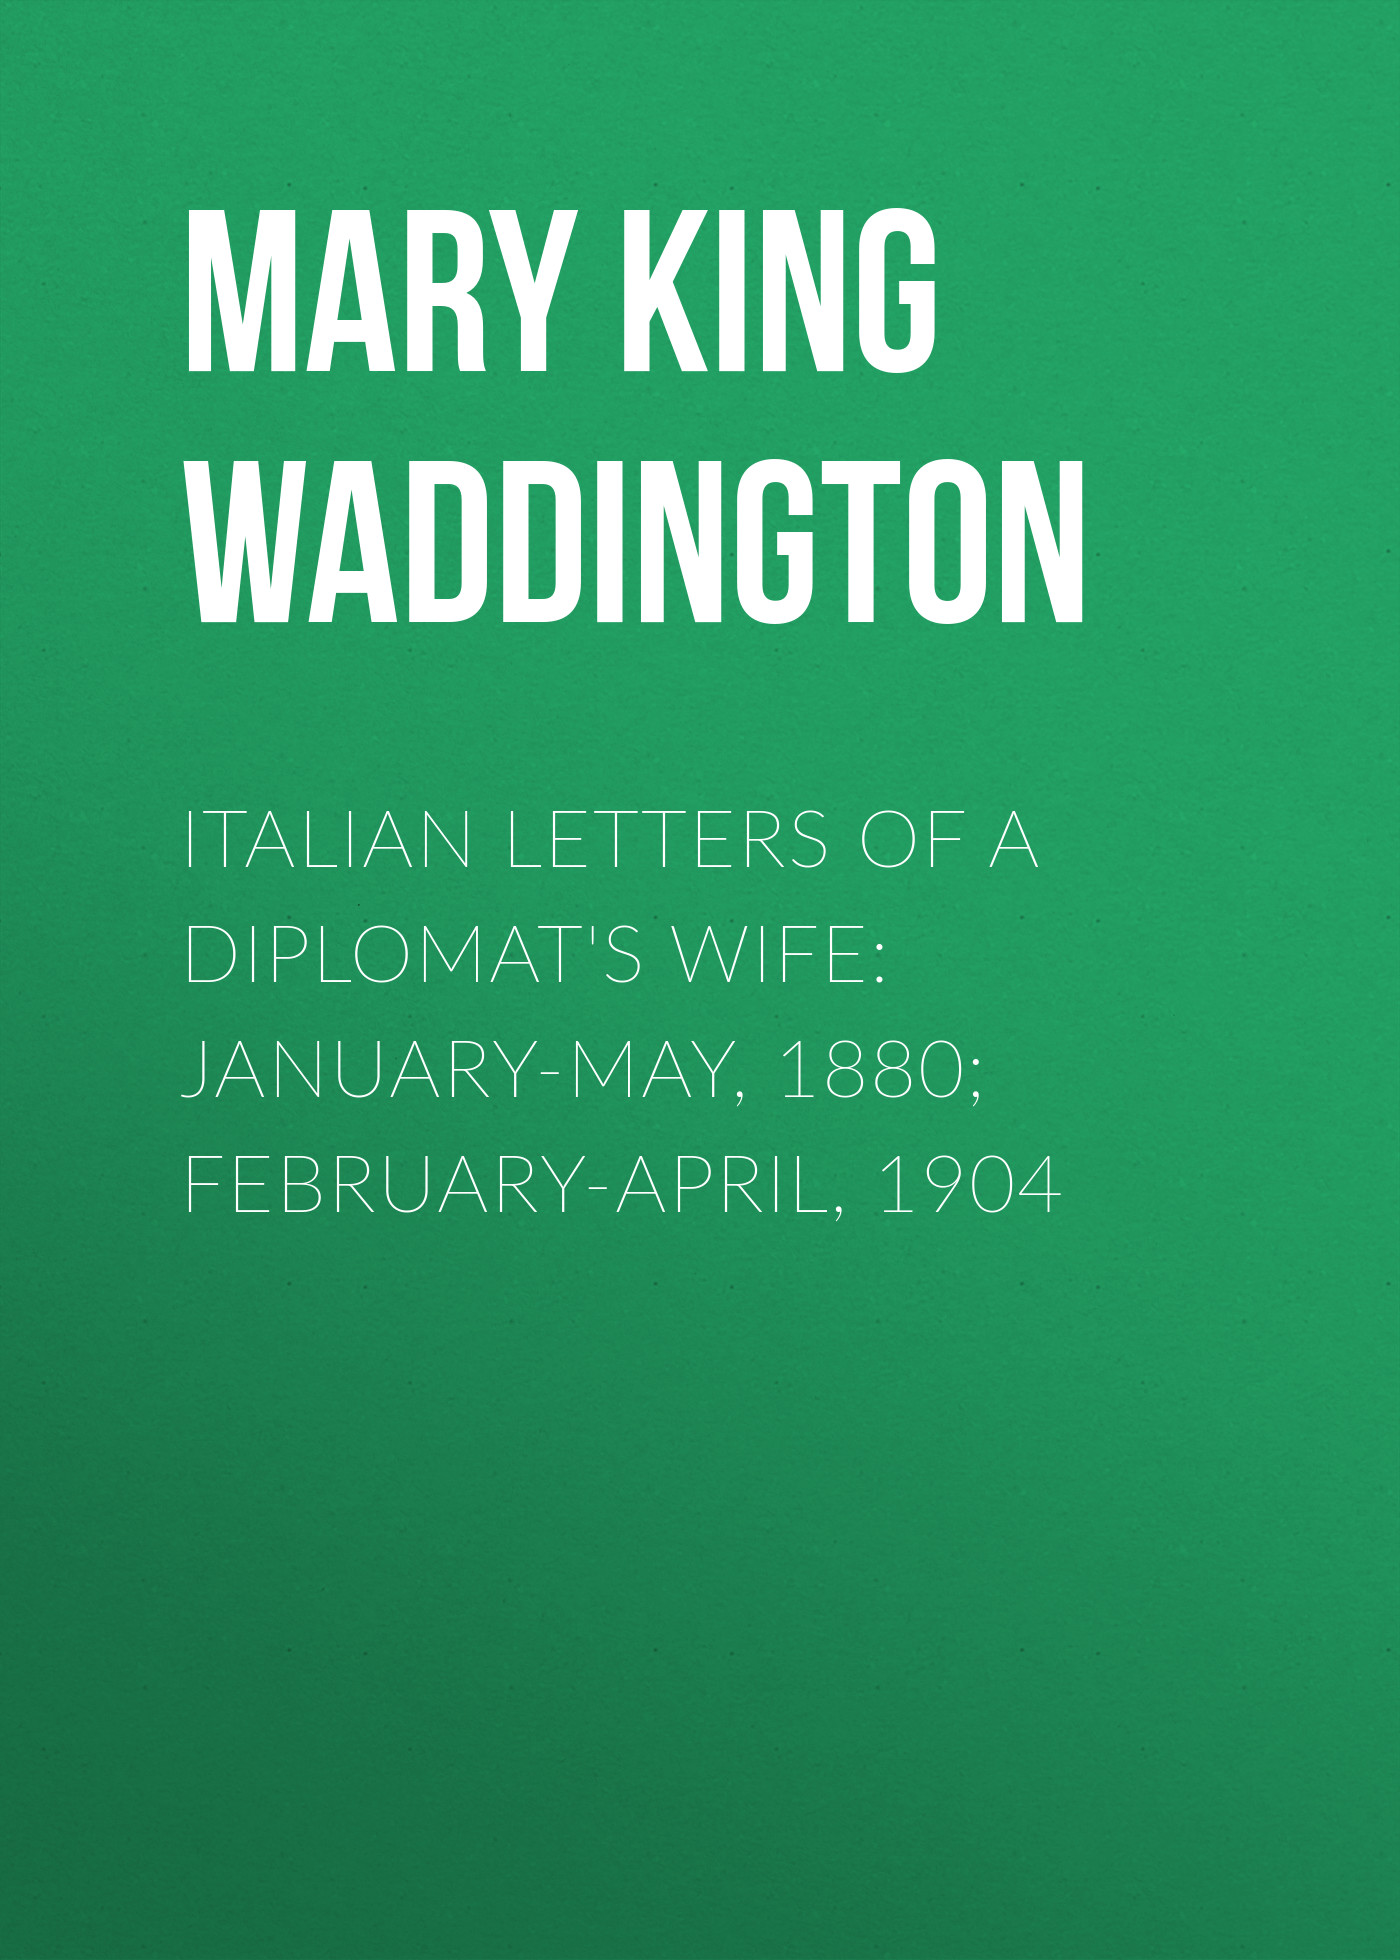 Italian Letters of a Diplomat's Wife: January-May, 1880; February-April, 1904